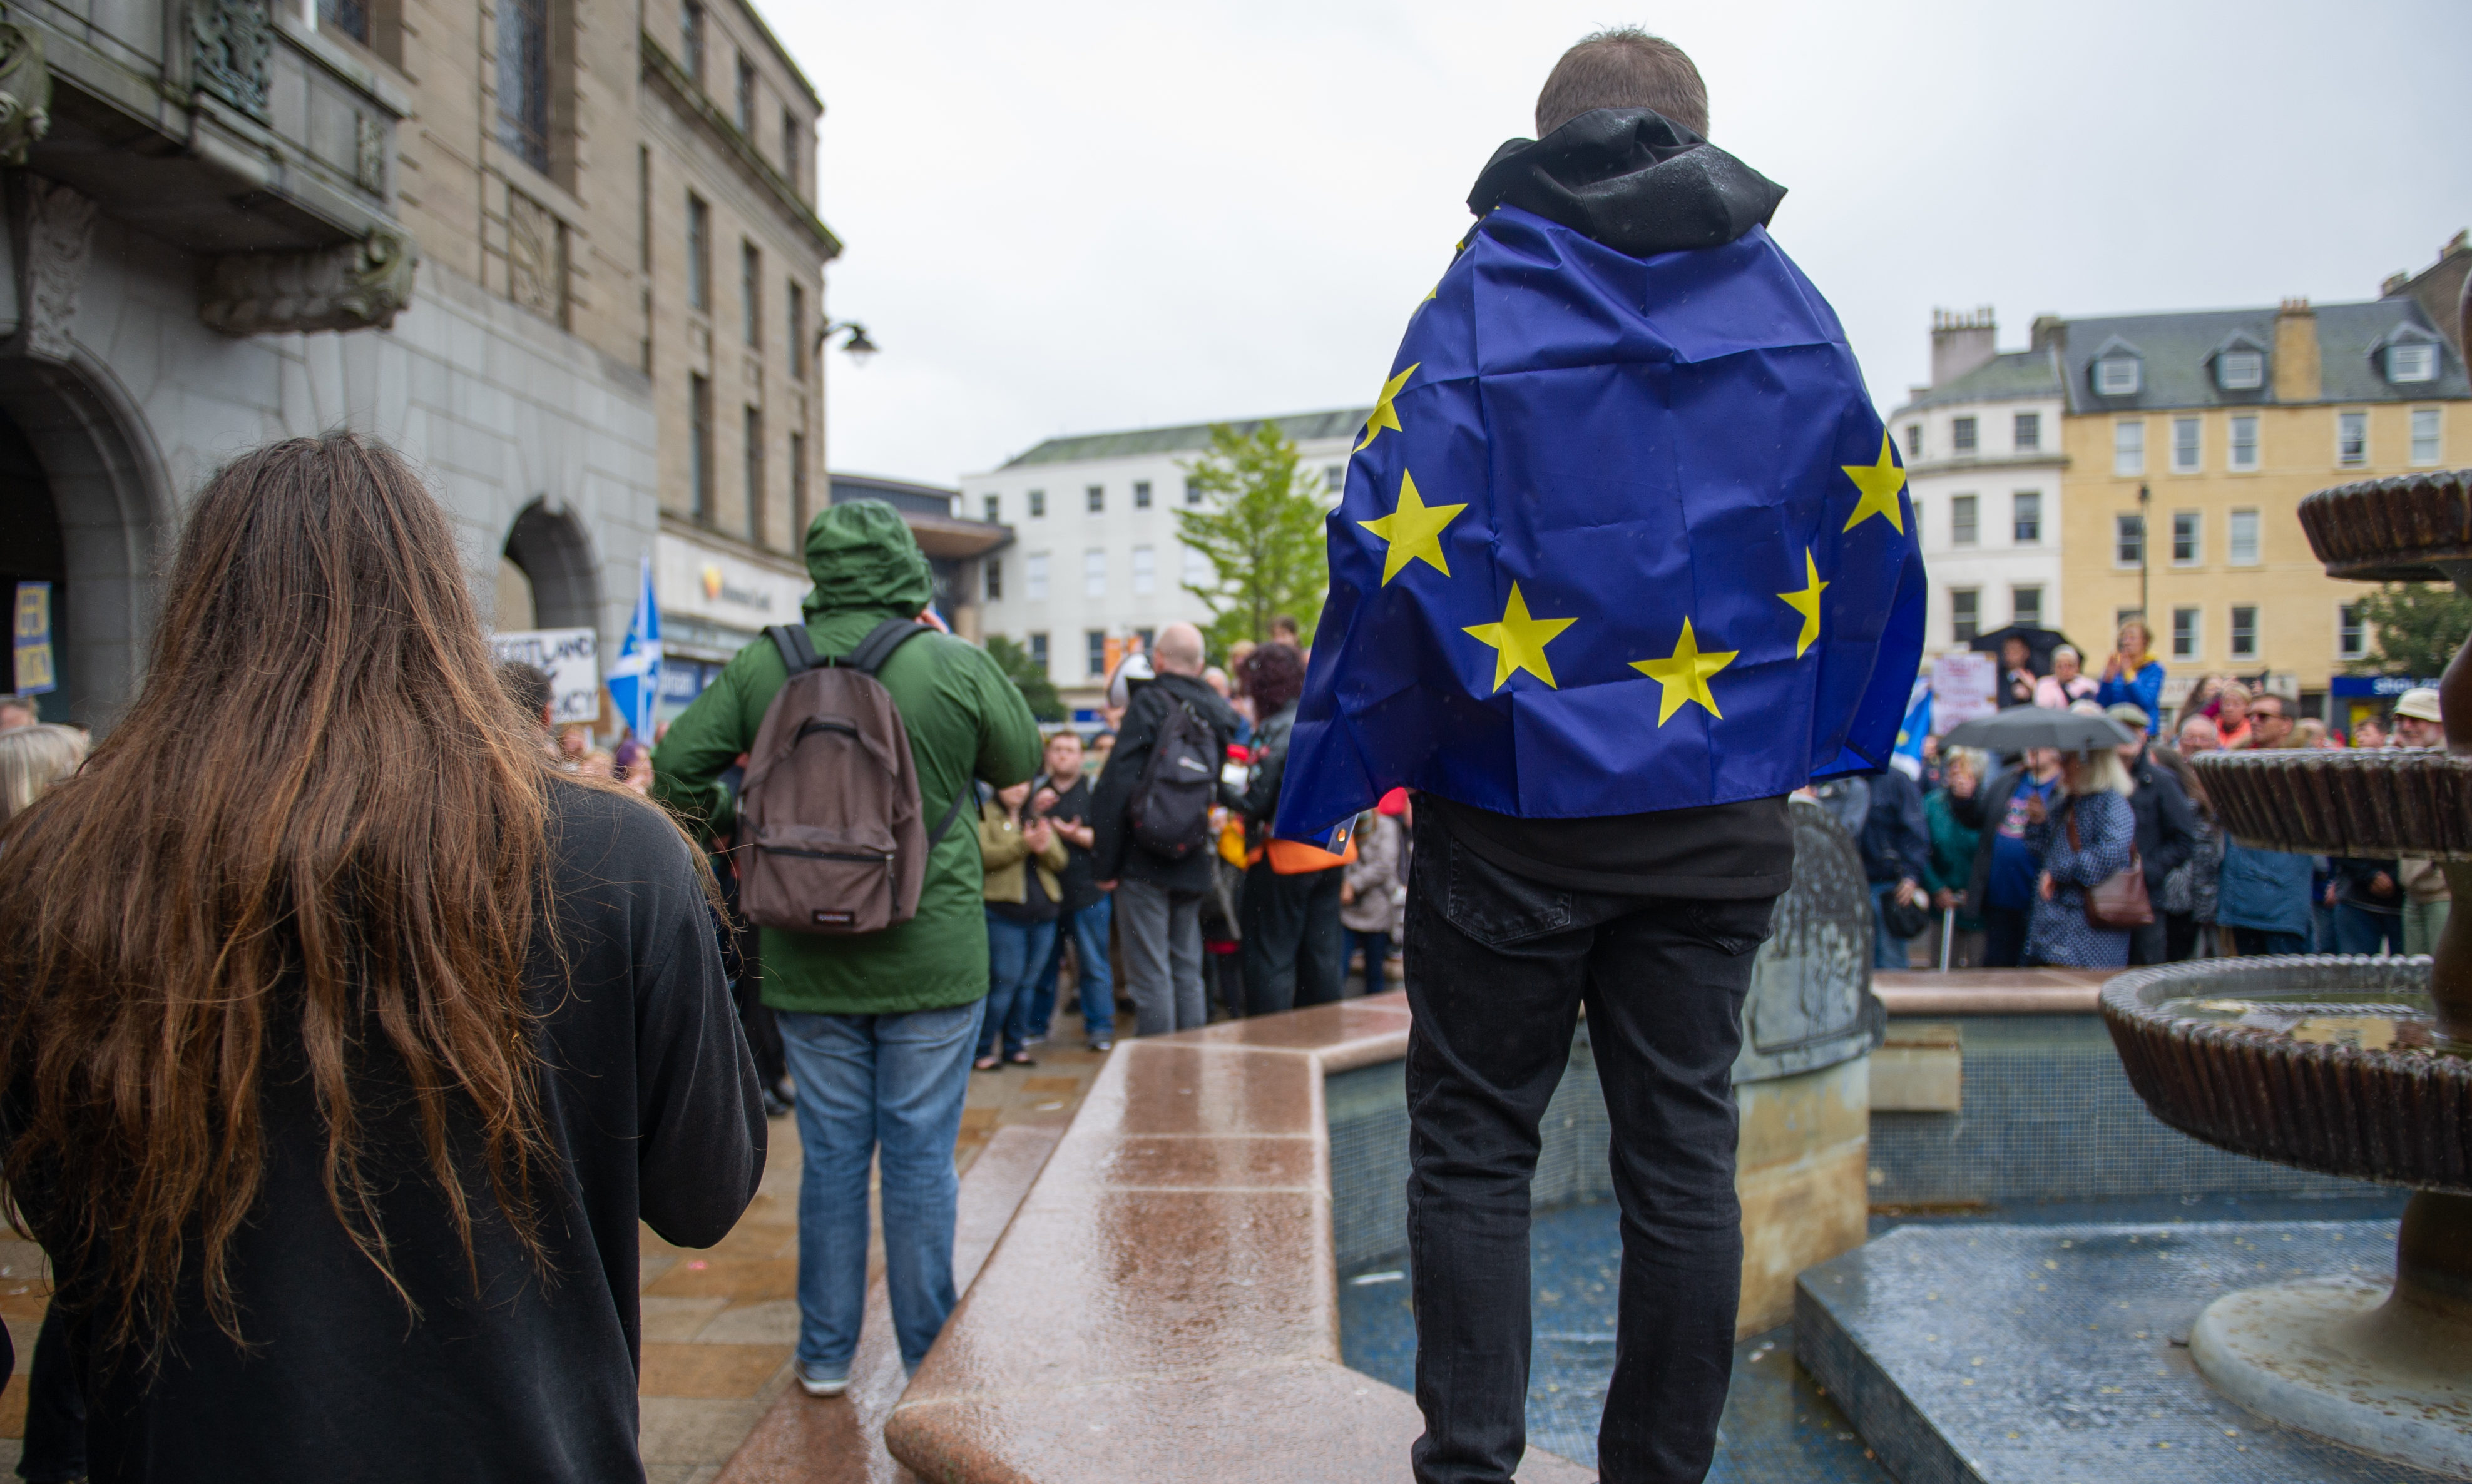 A protester wrapped in a Brexit flag outside Dundee City Chambers in September 2019.